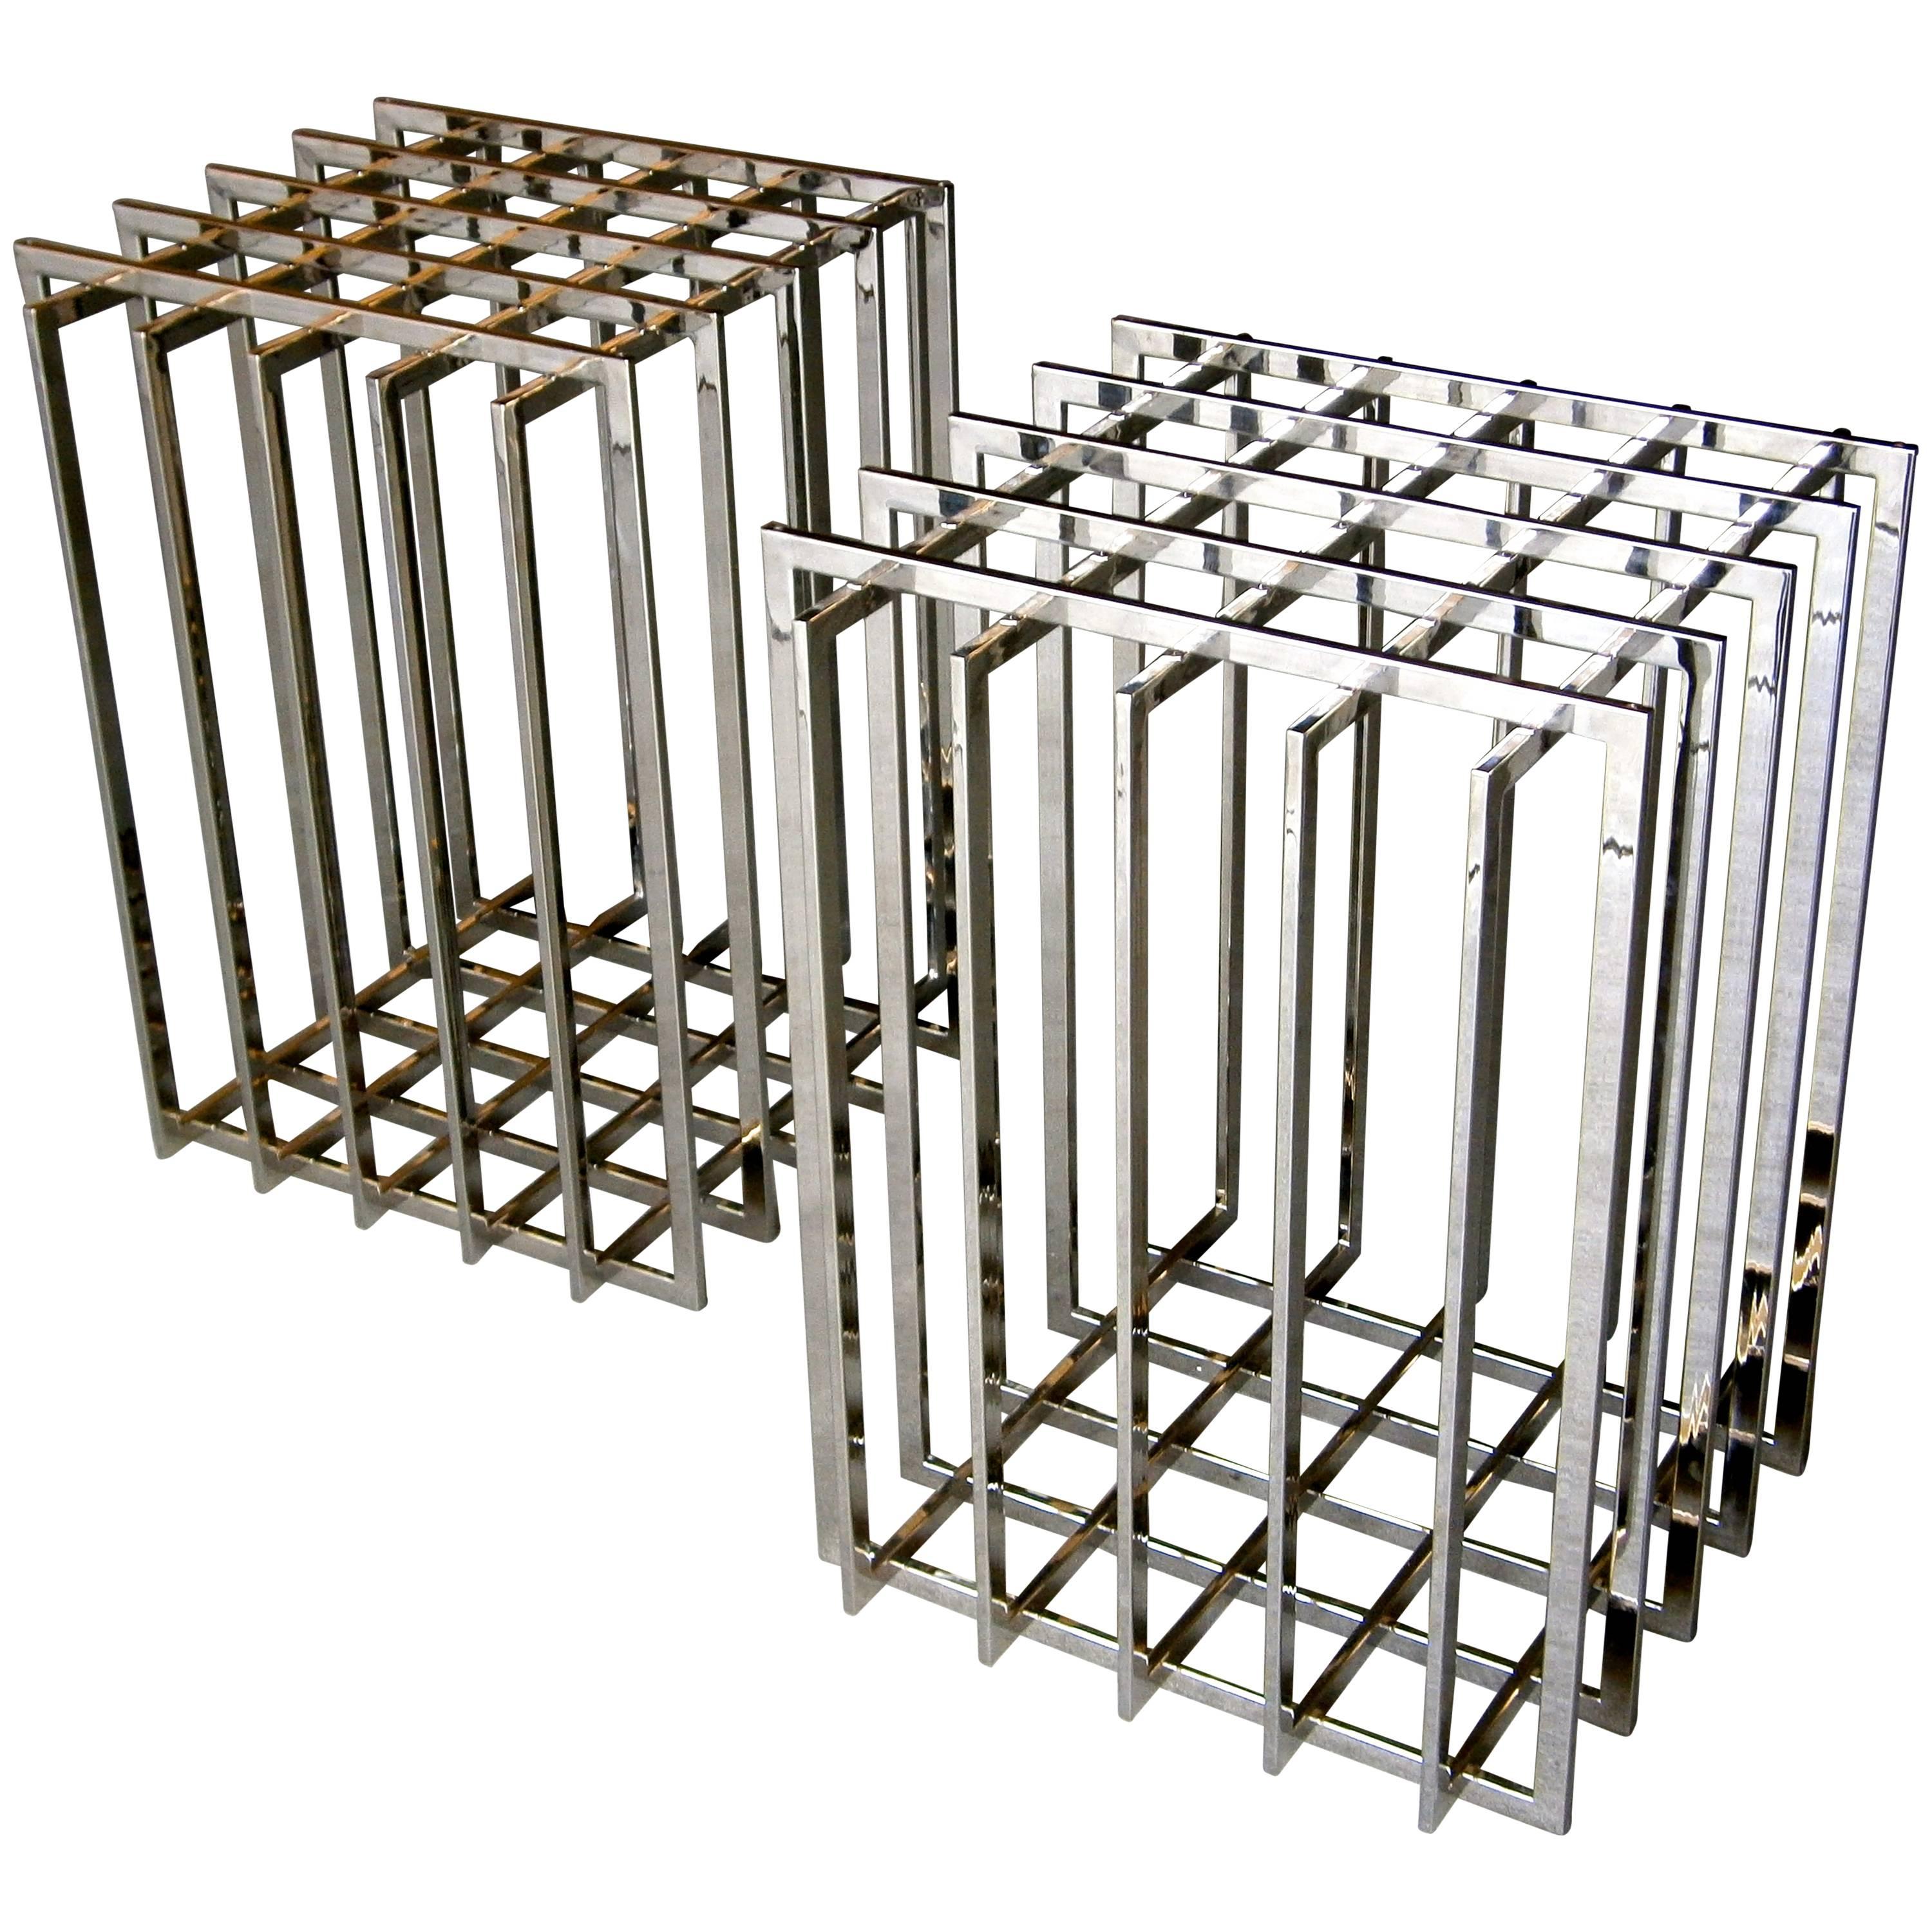 Pair of Nickel Plated Cage-Form Table Bases by Pierre Cardin  C. 1970s